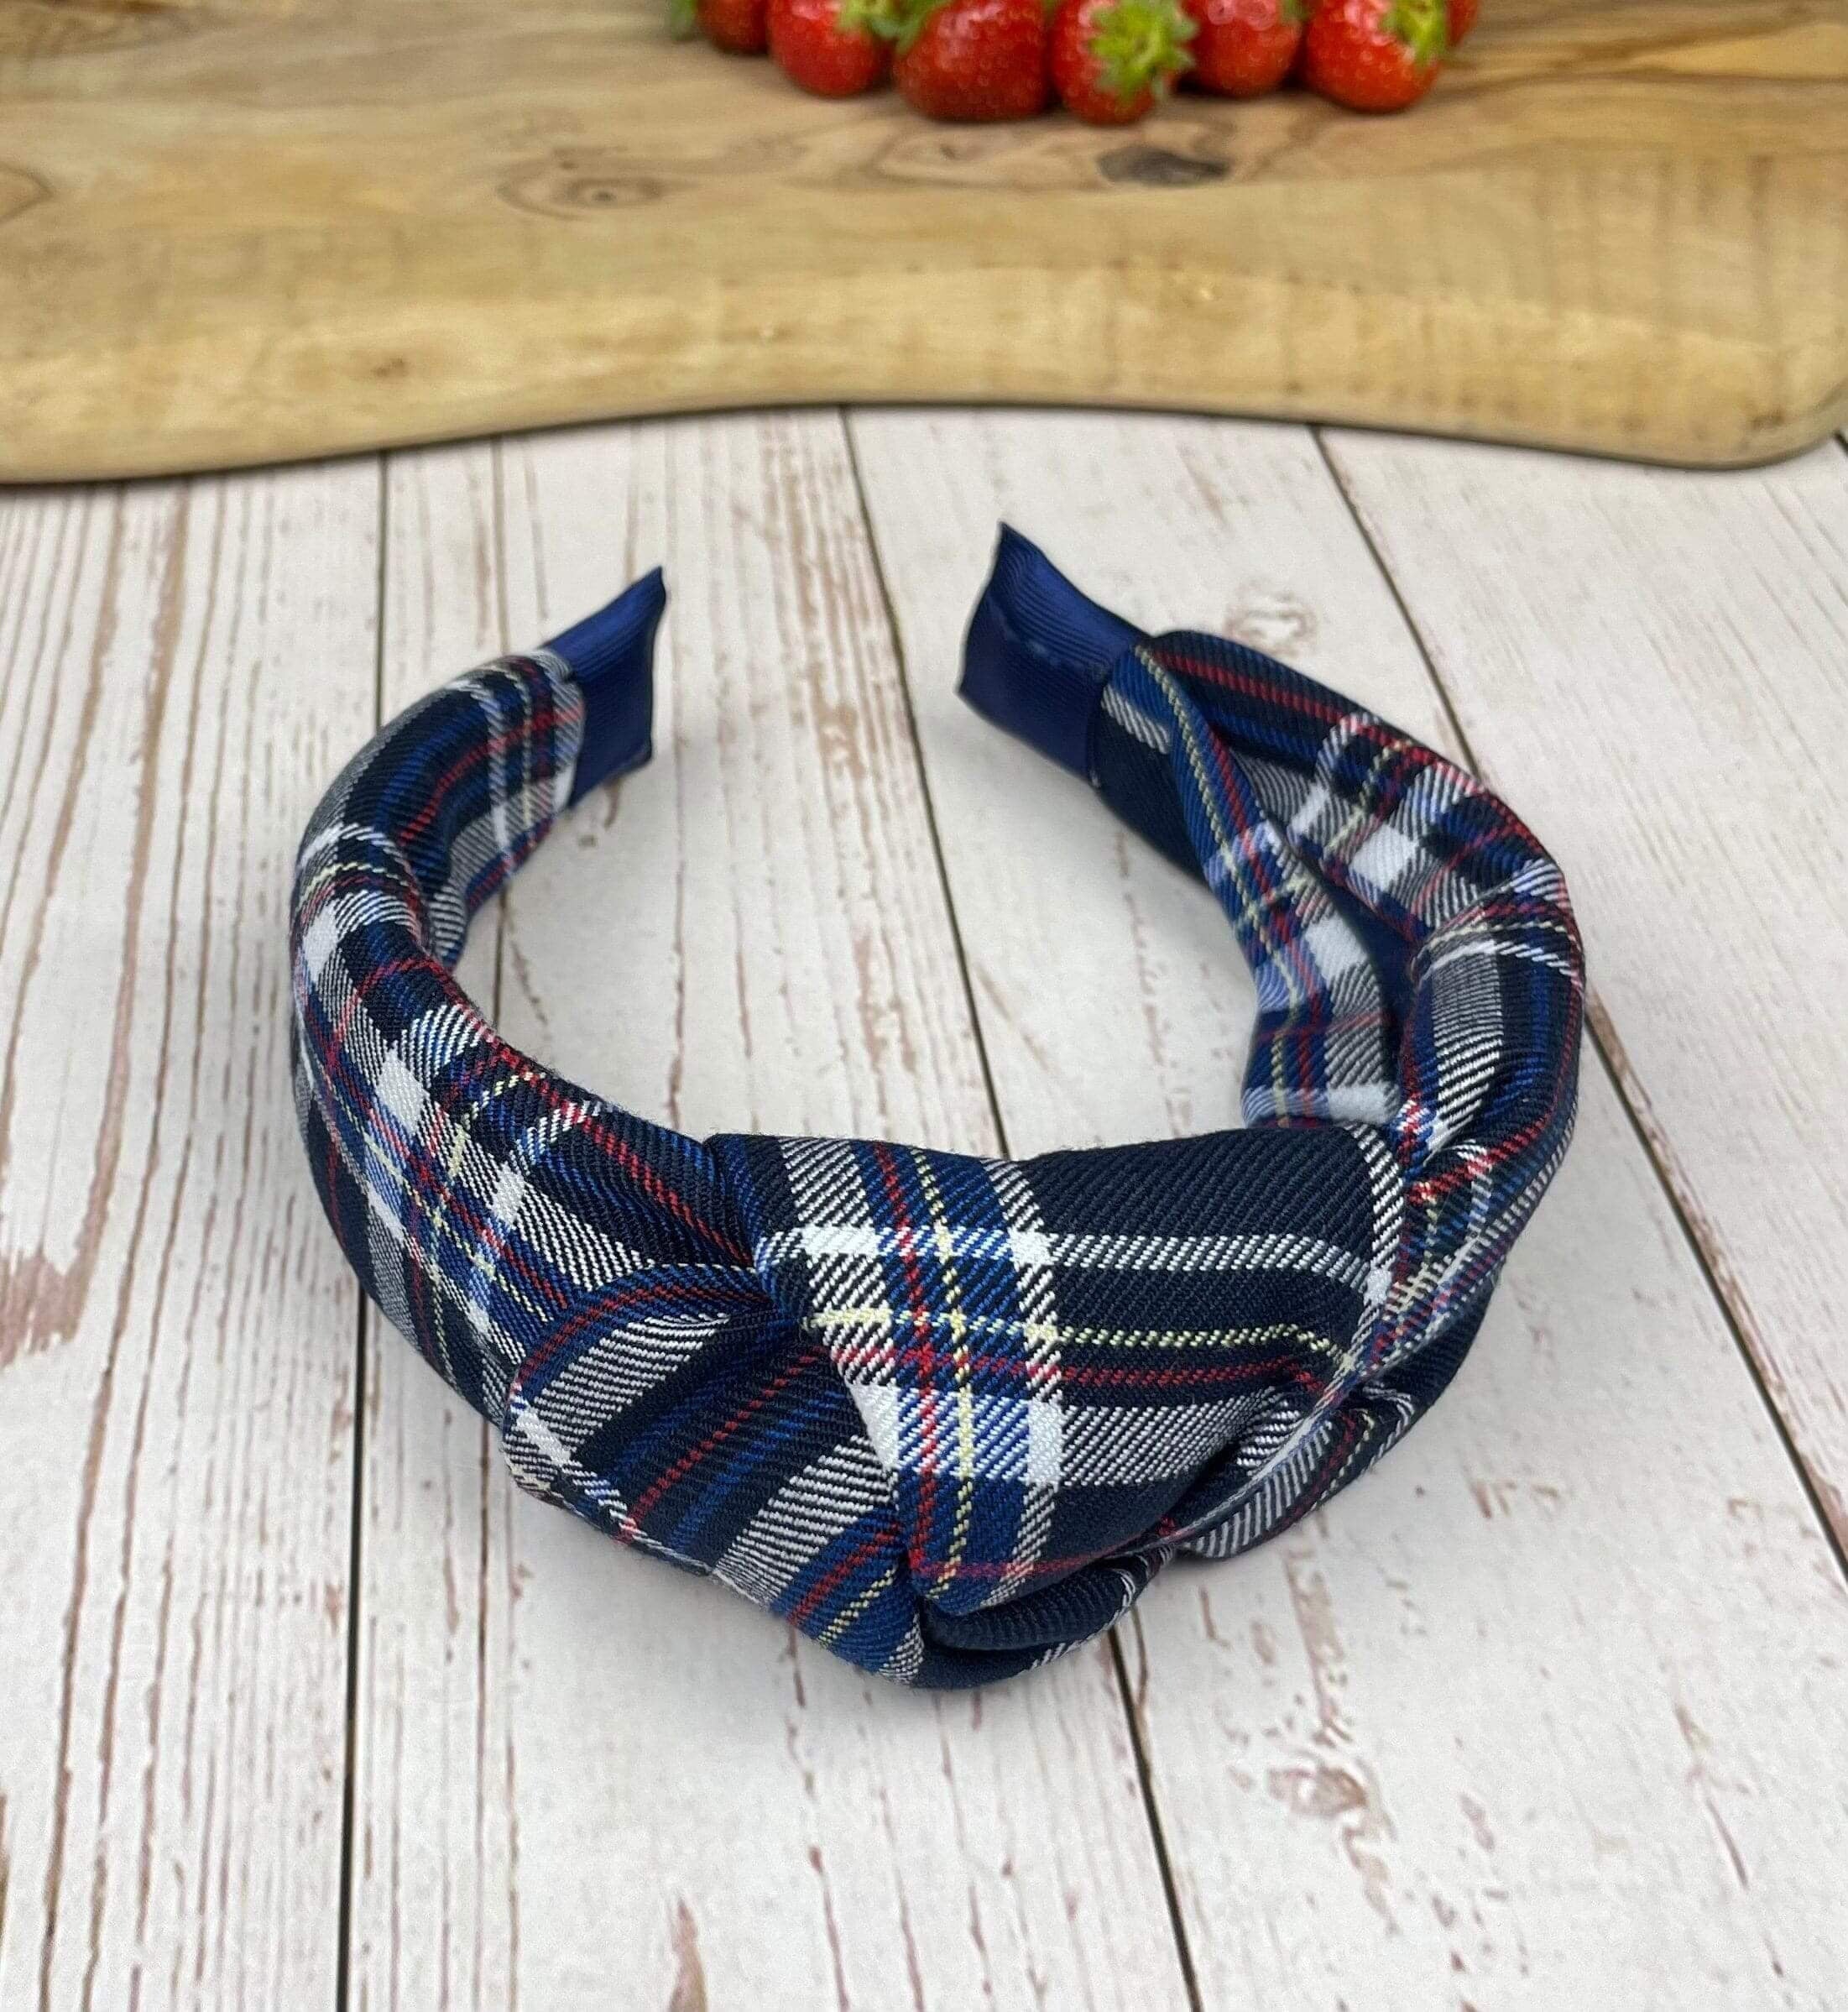 Add a touch of pattern to your hair game with our Navy Blue and Pattern Headband. This fashion wide hairband is perfect for teenage girls looking for a stylish accessory.